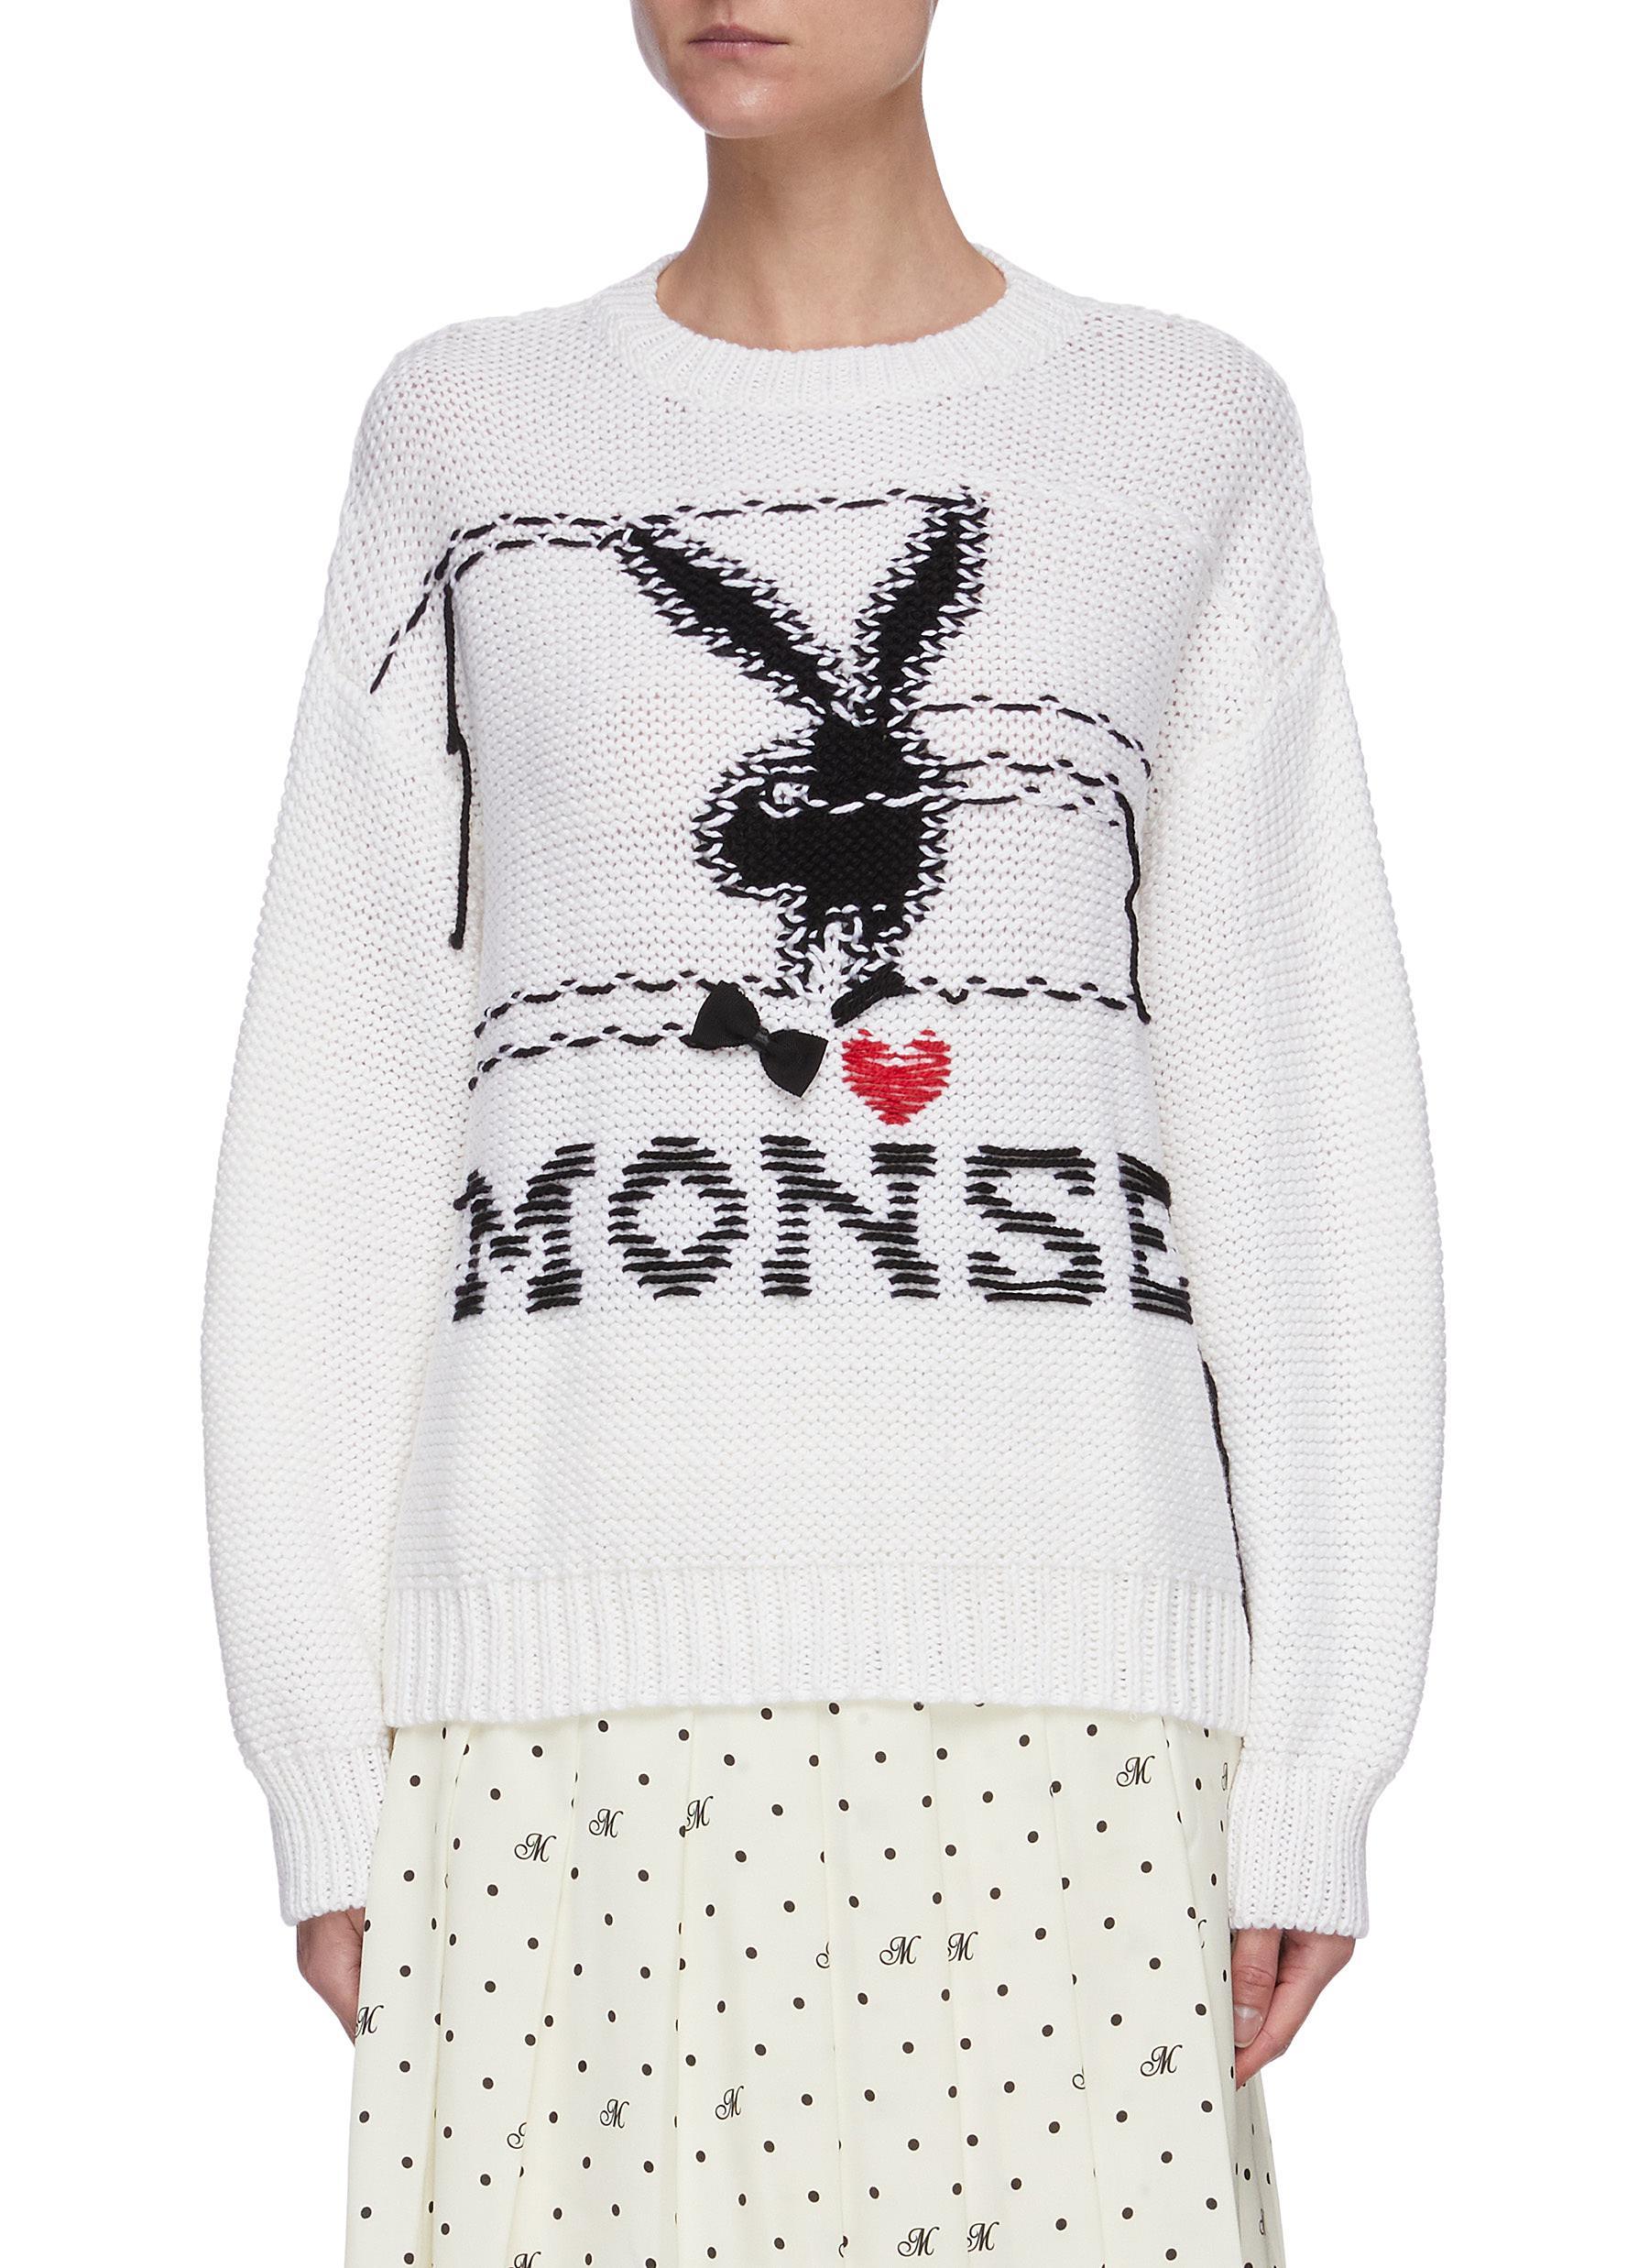 Monse Wool X Playboy Embroidered Sweater in White - Lyst